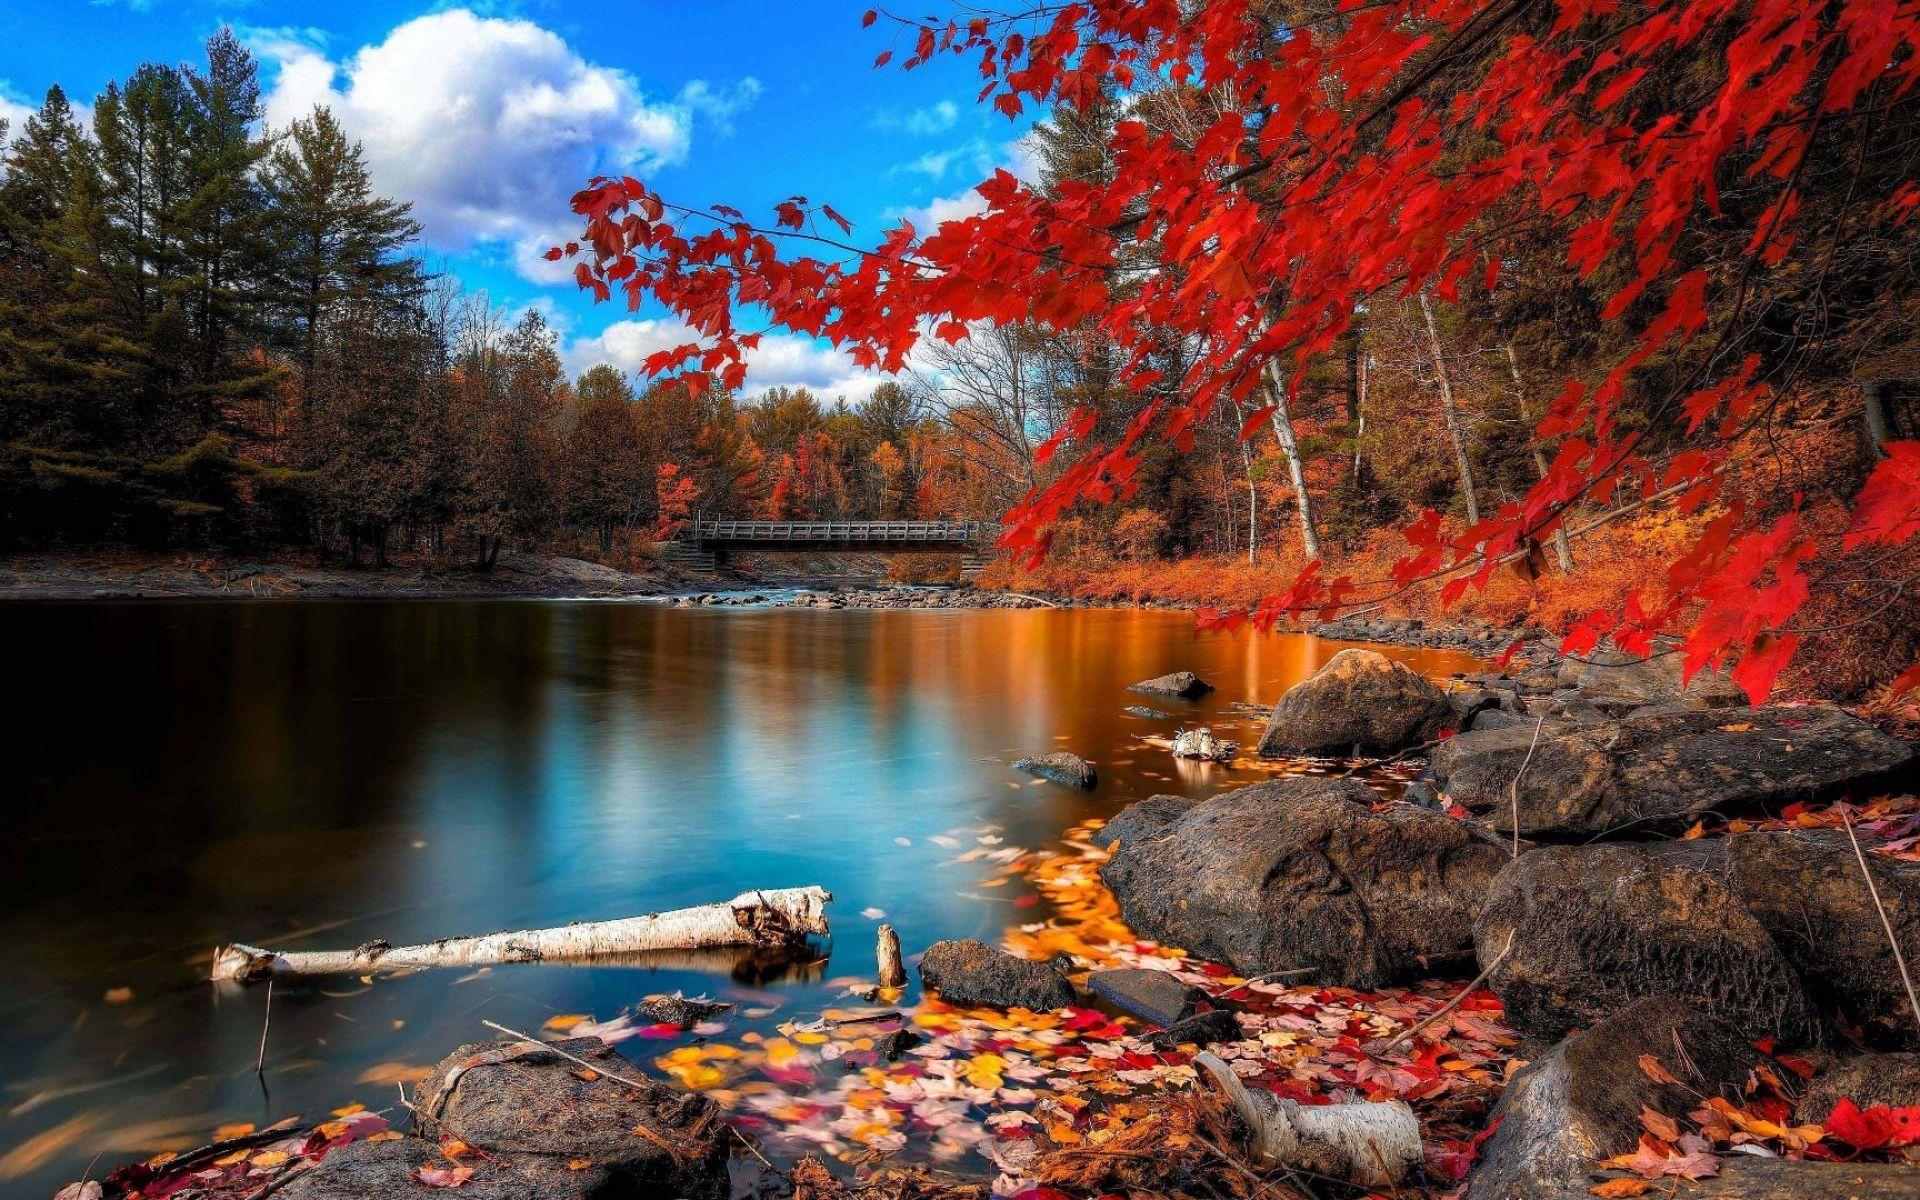 Red Maple Tree And The Lake. HD Nature Wallpaper for Mobile